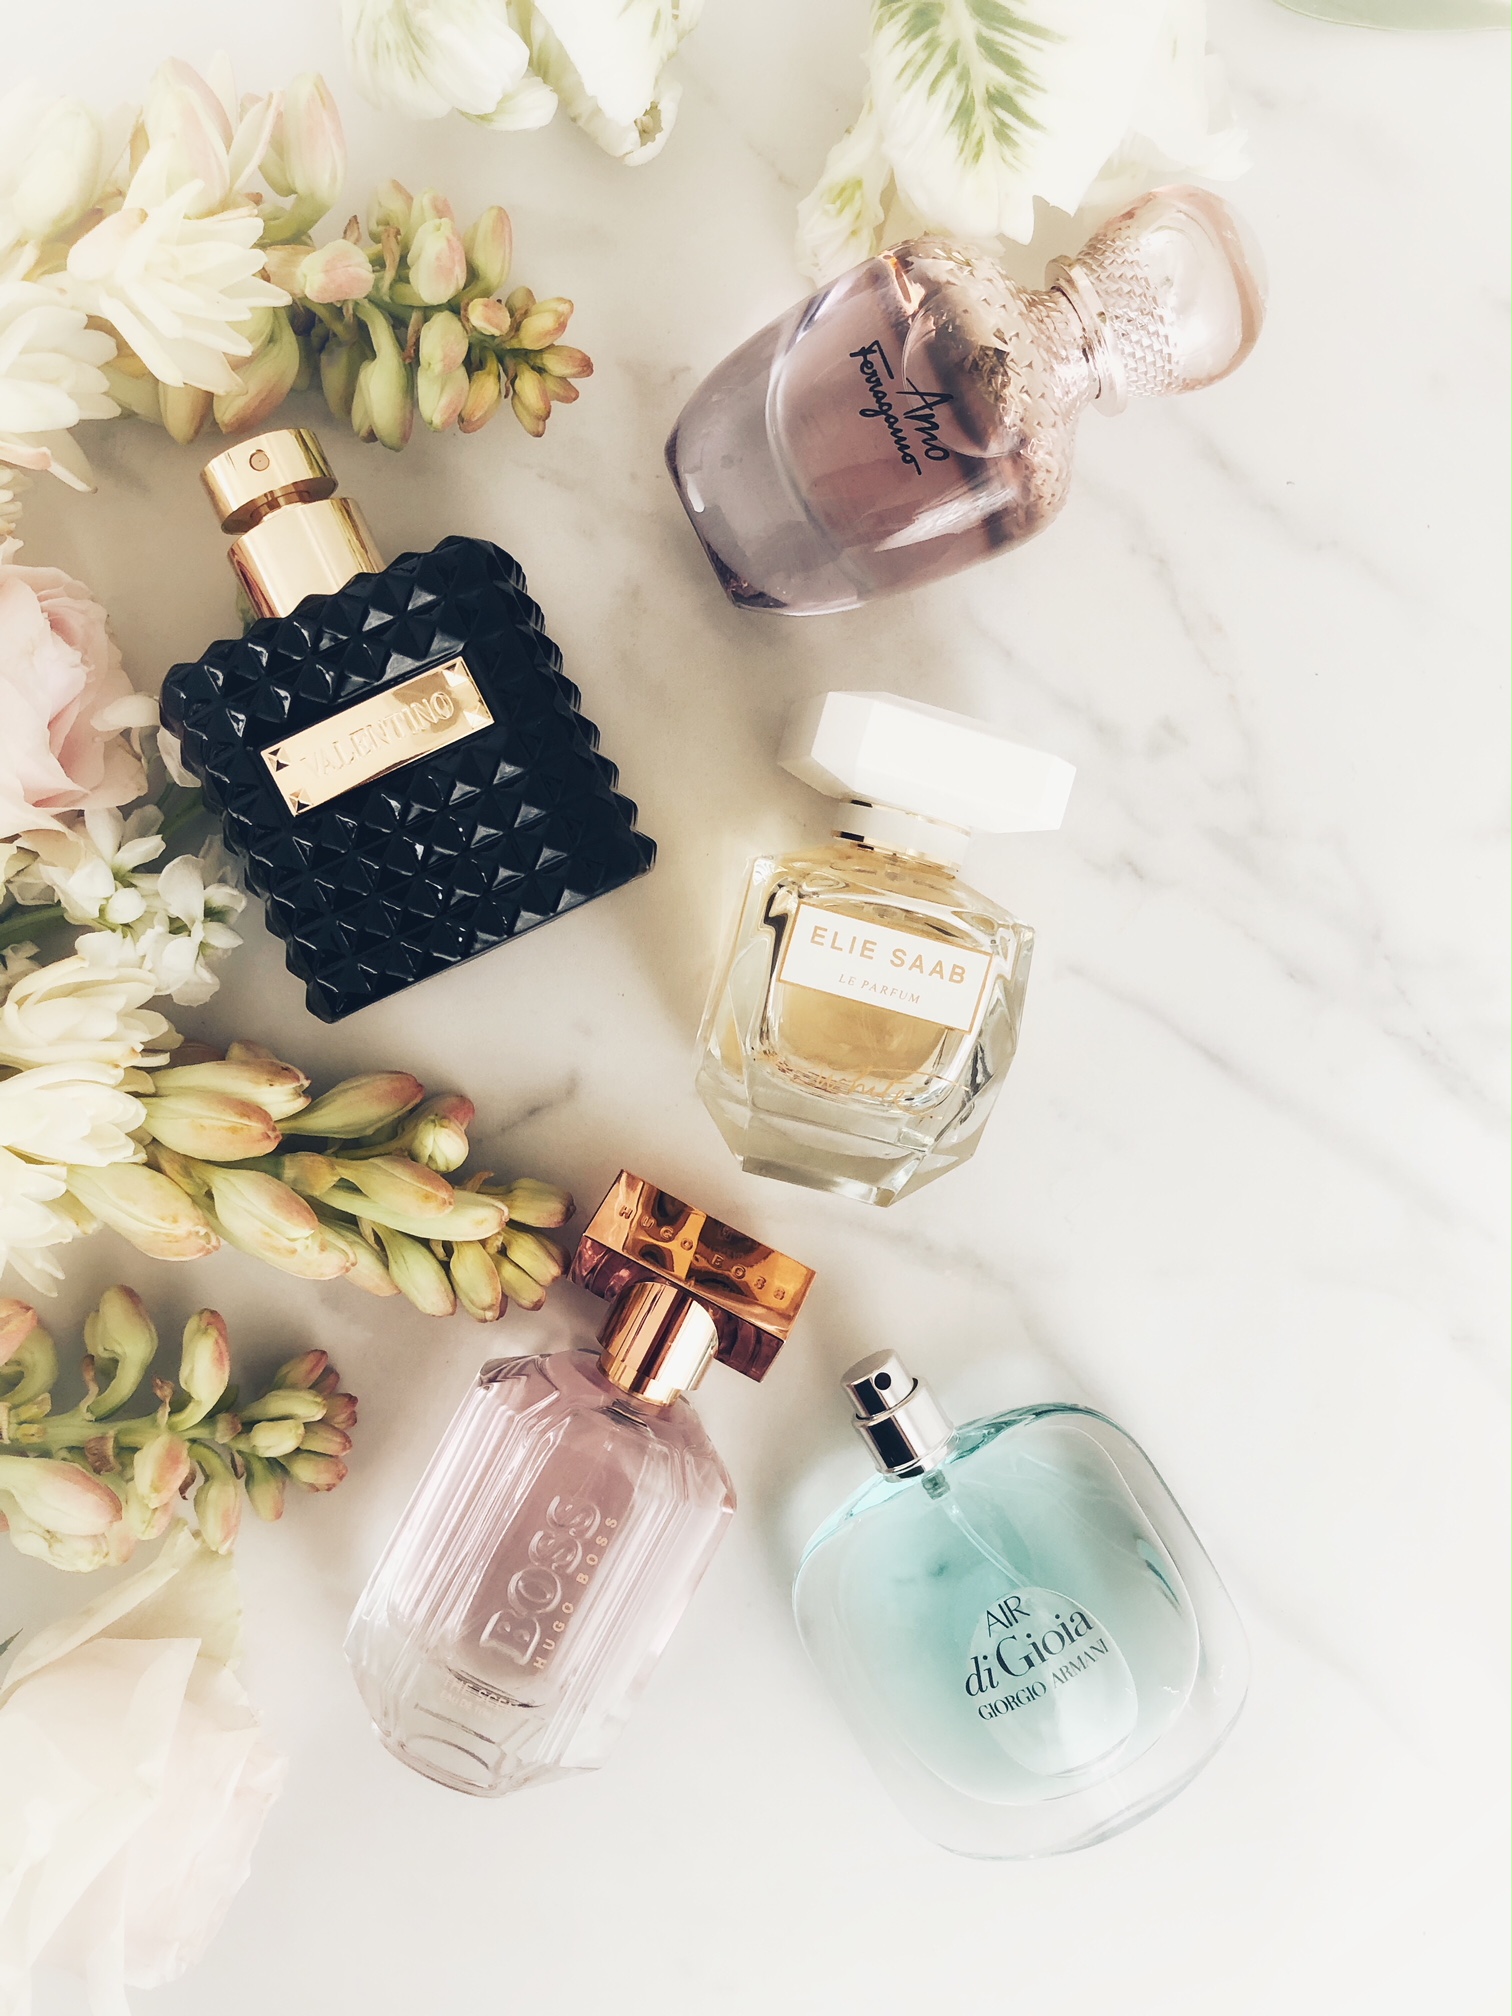 Scents and Sensibility – There’s no such thing as a seasonal scent ...